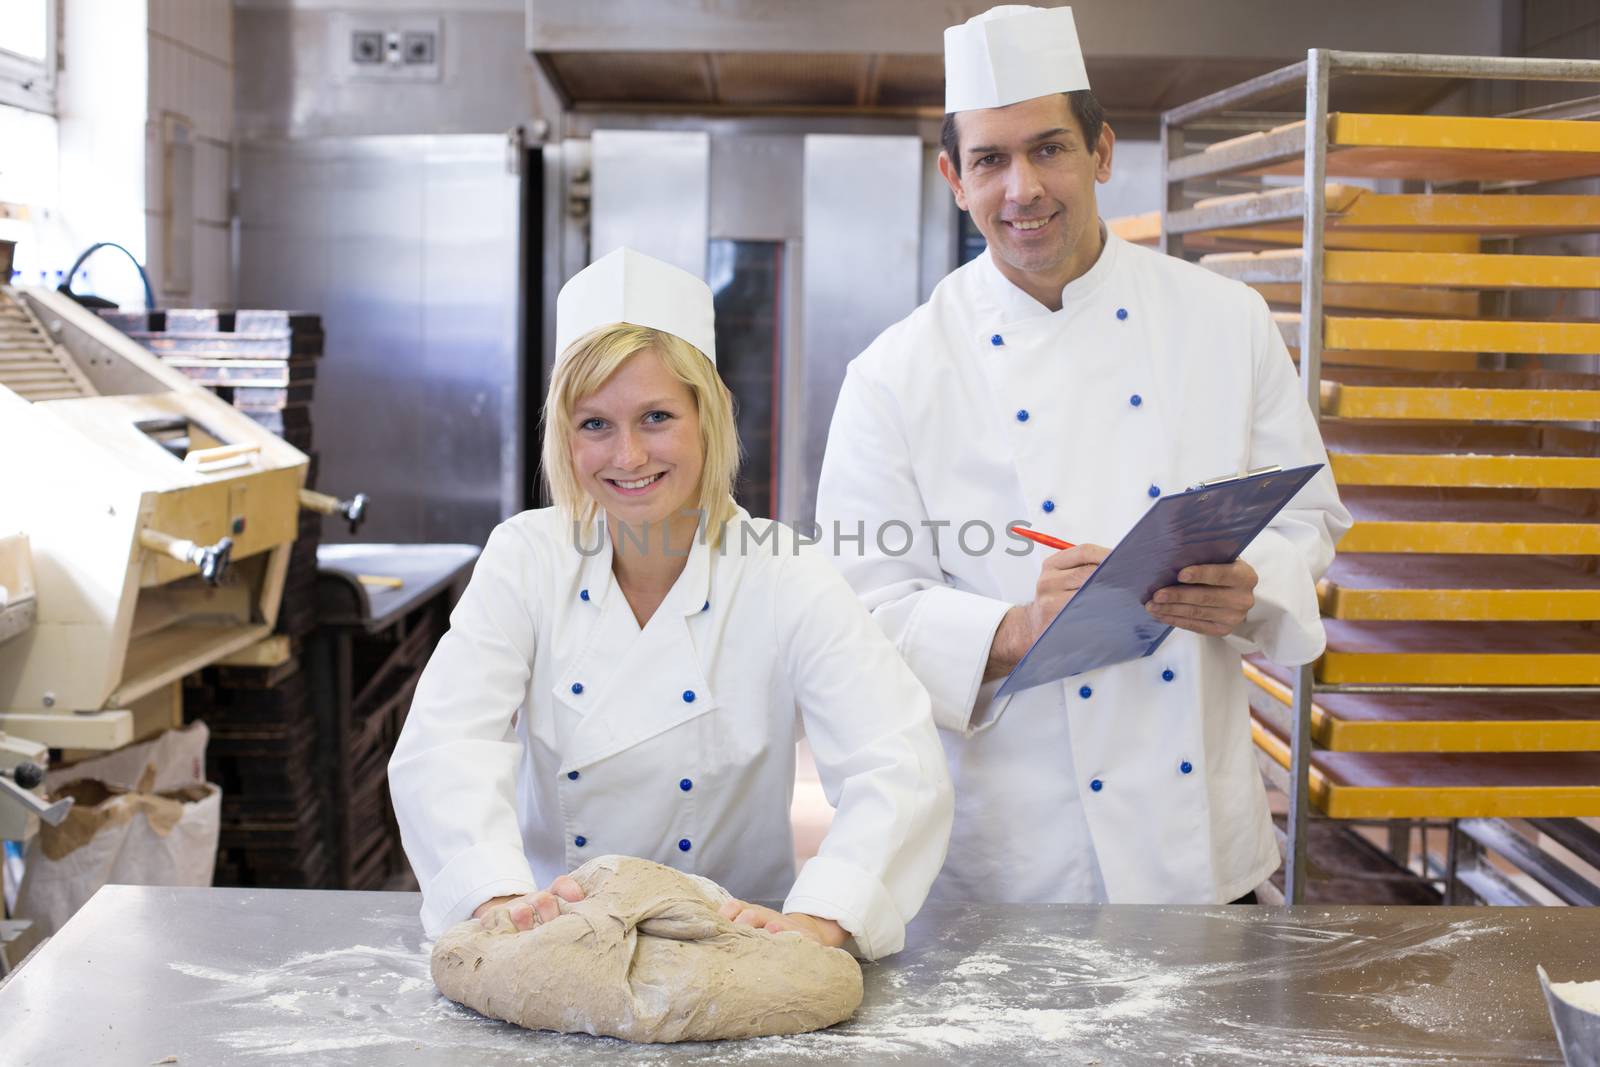 Instructor watching an apprentice kneading dough